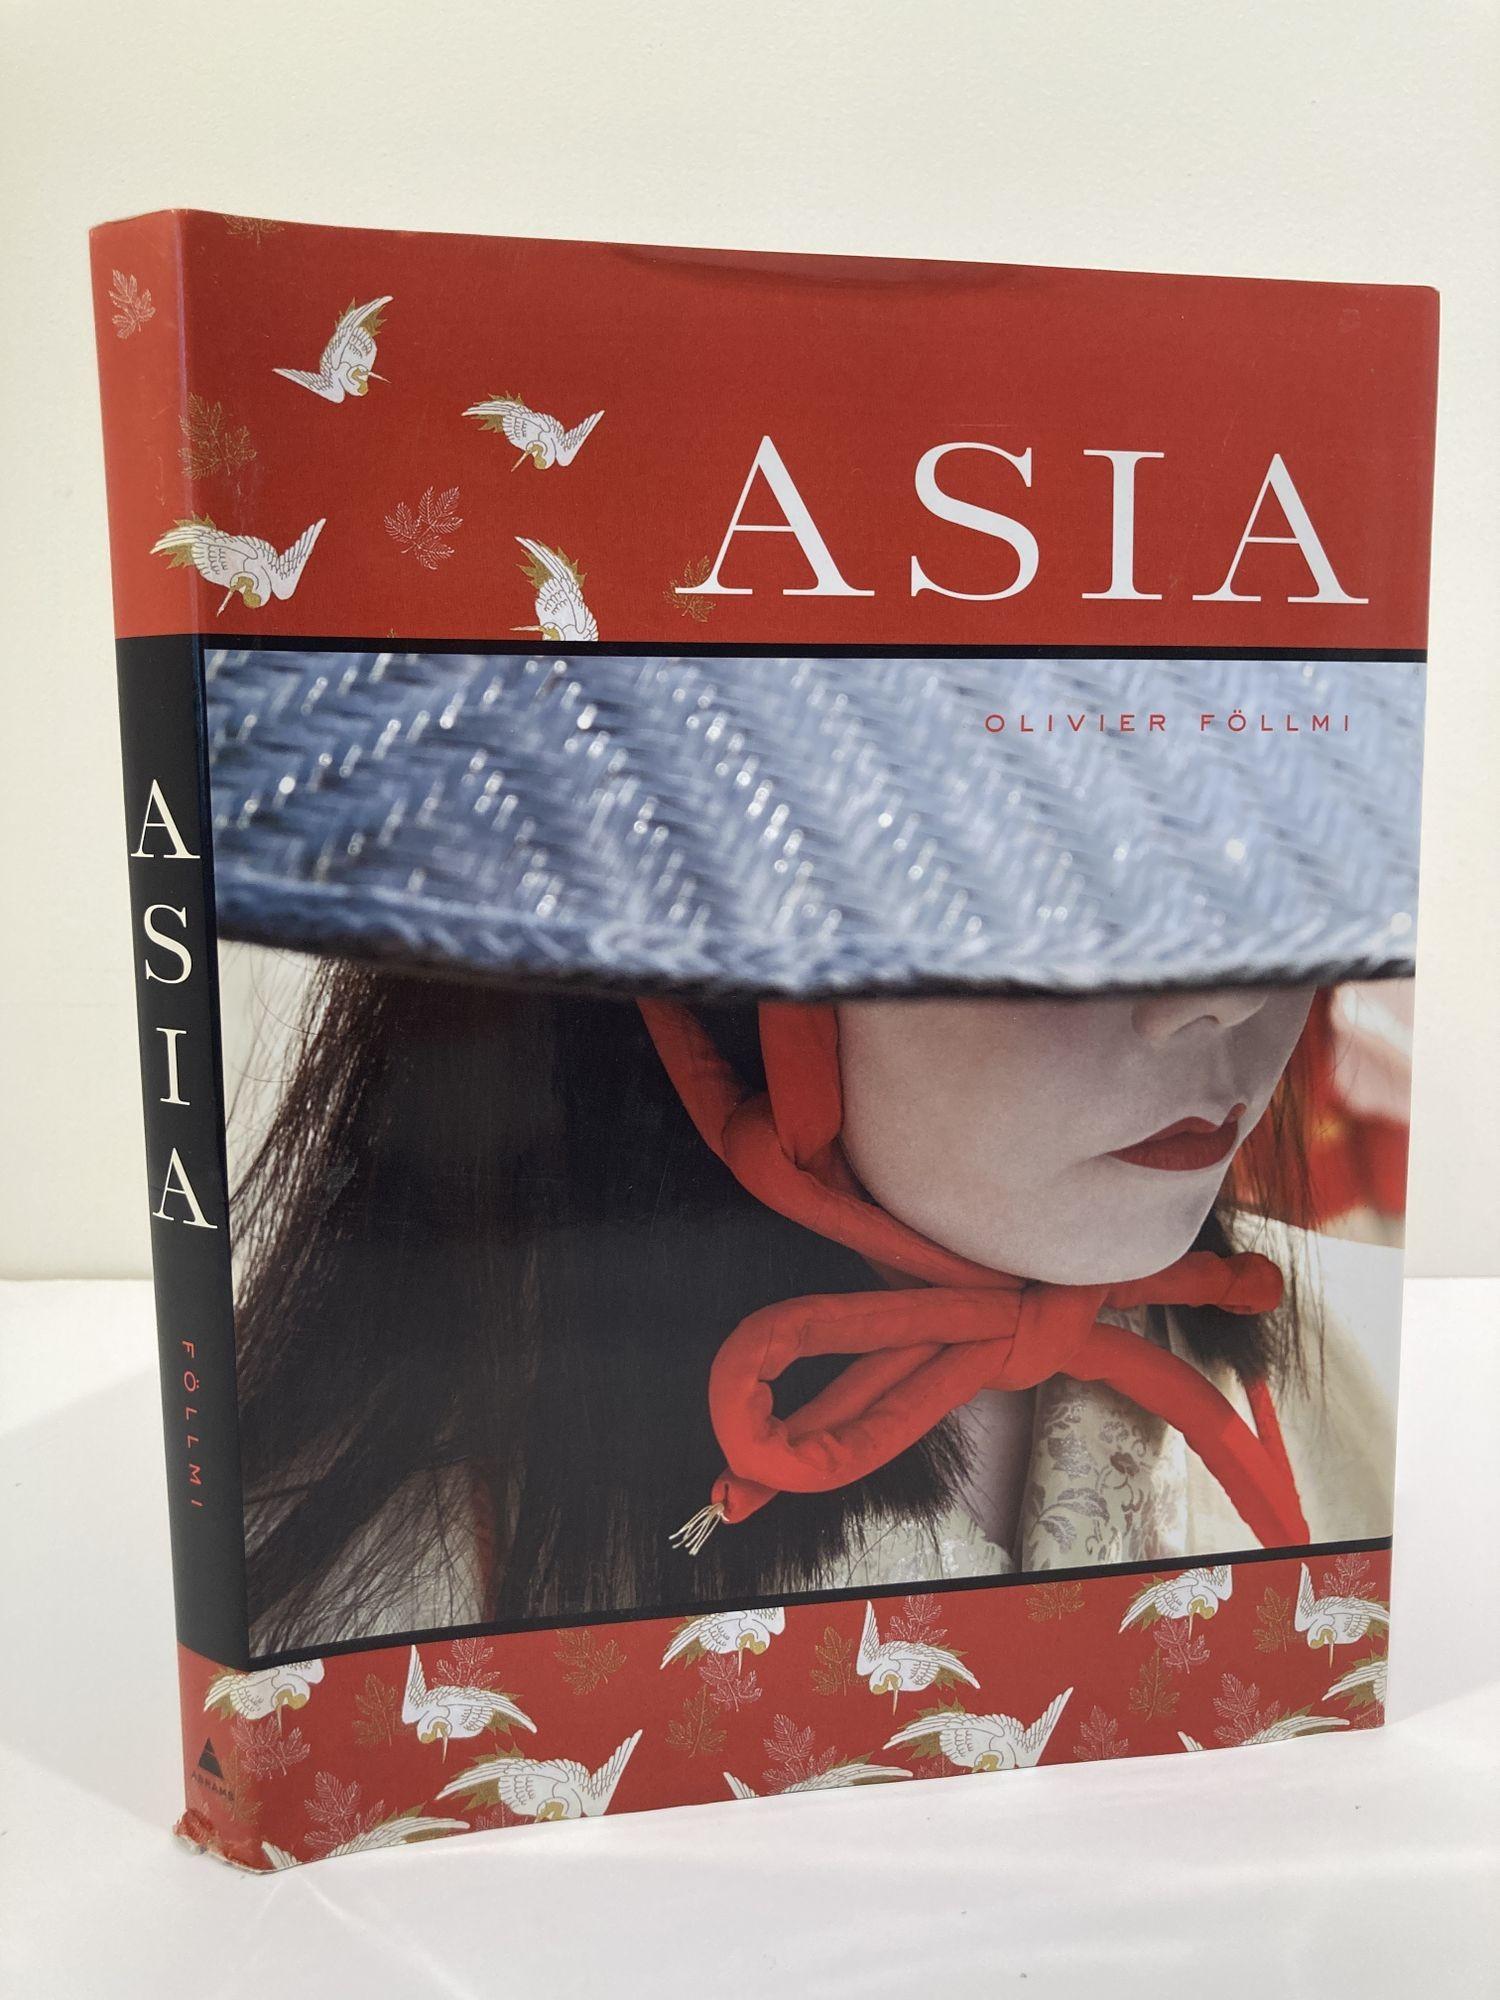 Asia by Olivier Follmi Large Hardcover Book 2008 In Good Condition For Sale In North Hollywood, CA